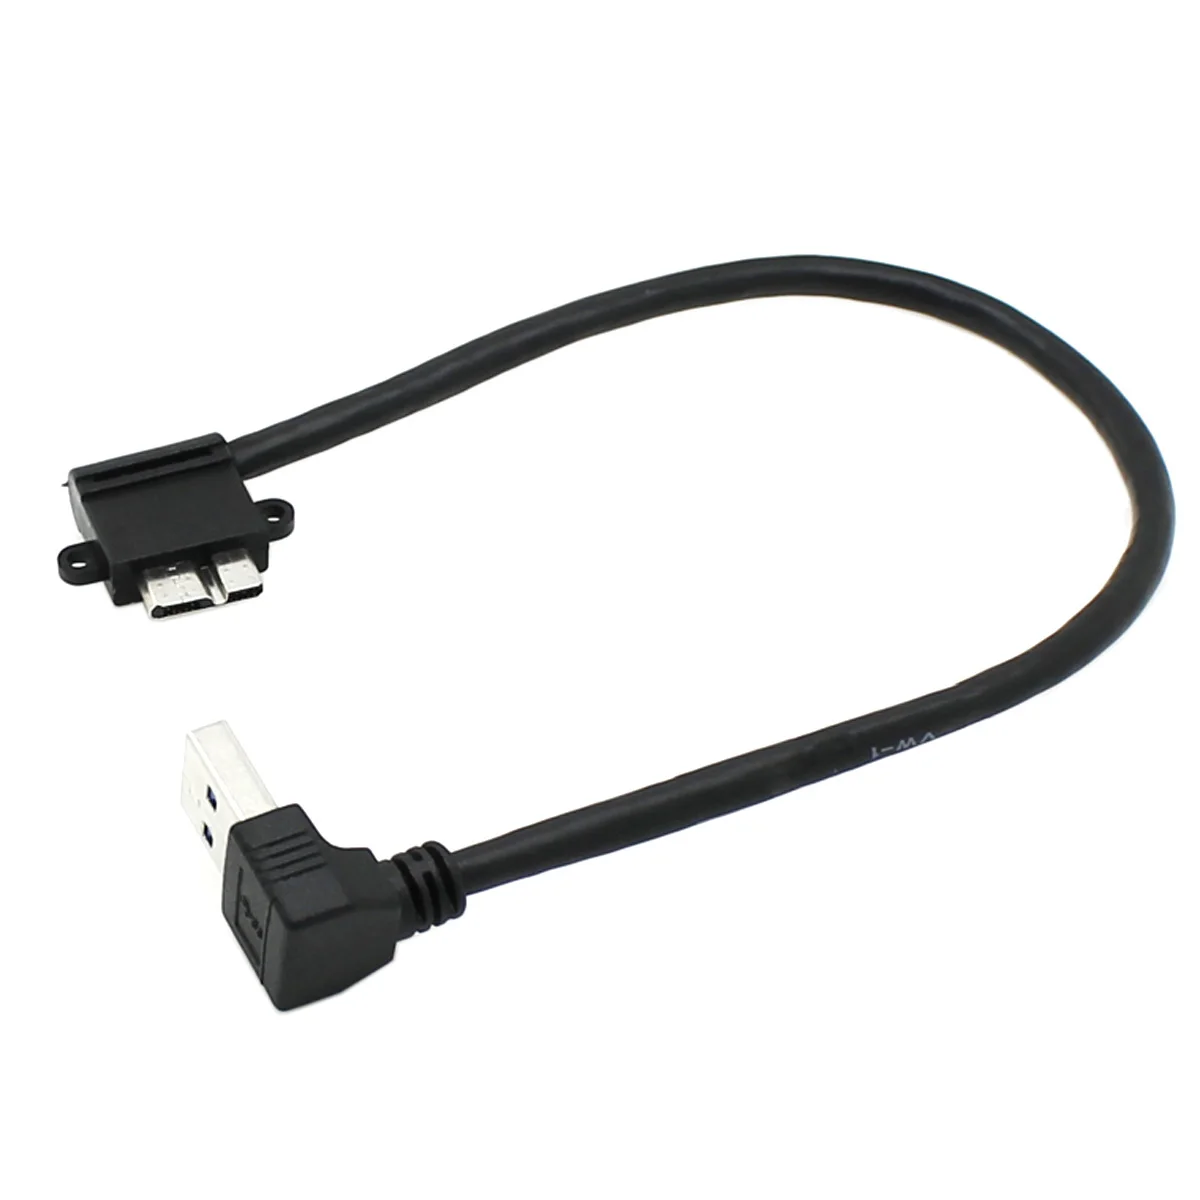 

USB 3.0 A Up Angled 90 Degree to Micro 10Pin Right Angled Cable 20cm for Note3 N9000 N900 & S5 i9600 Cell phone & Hard Disk SSD